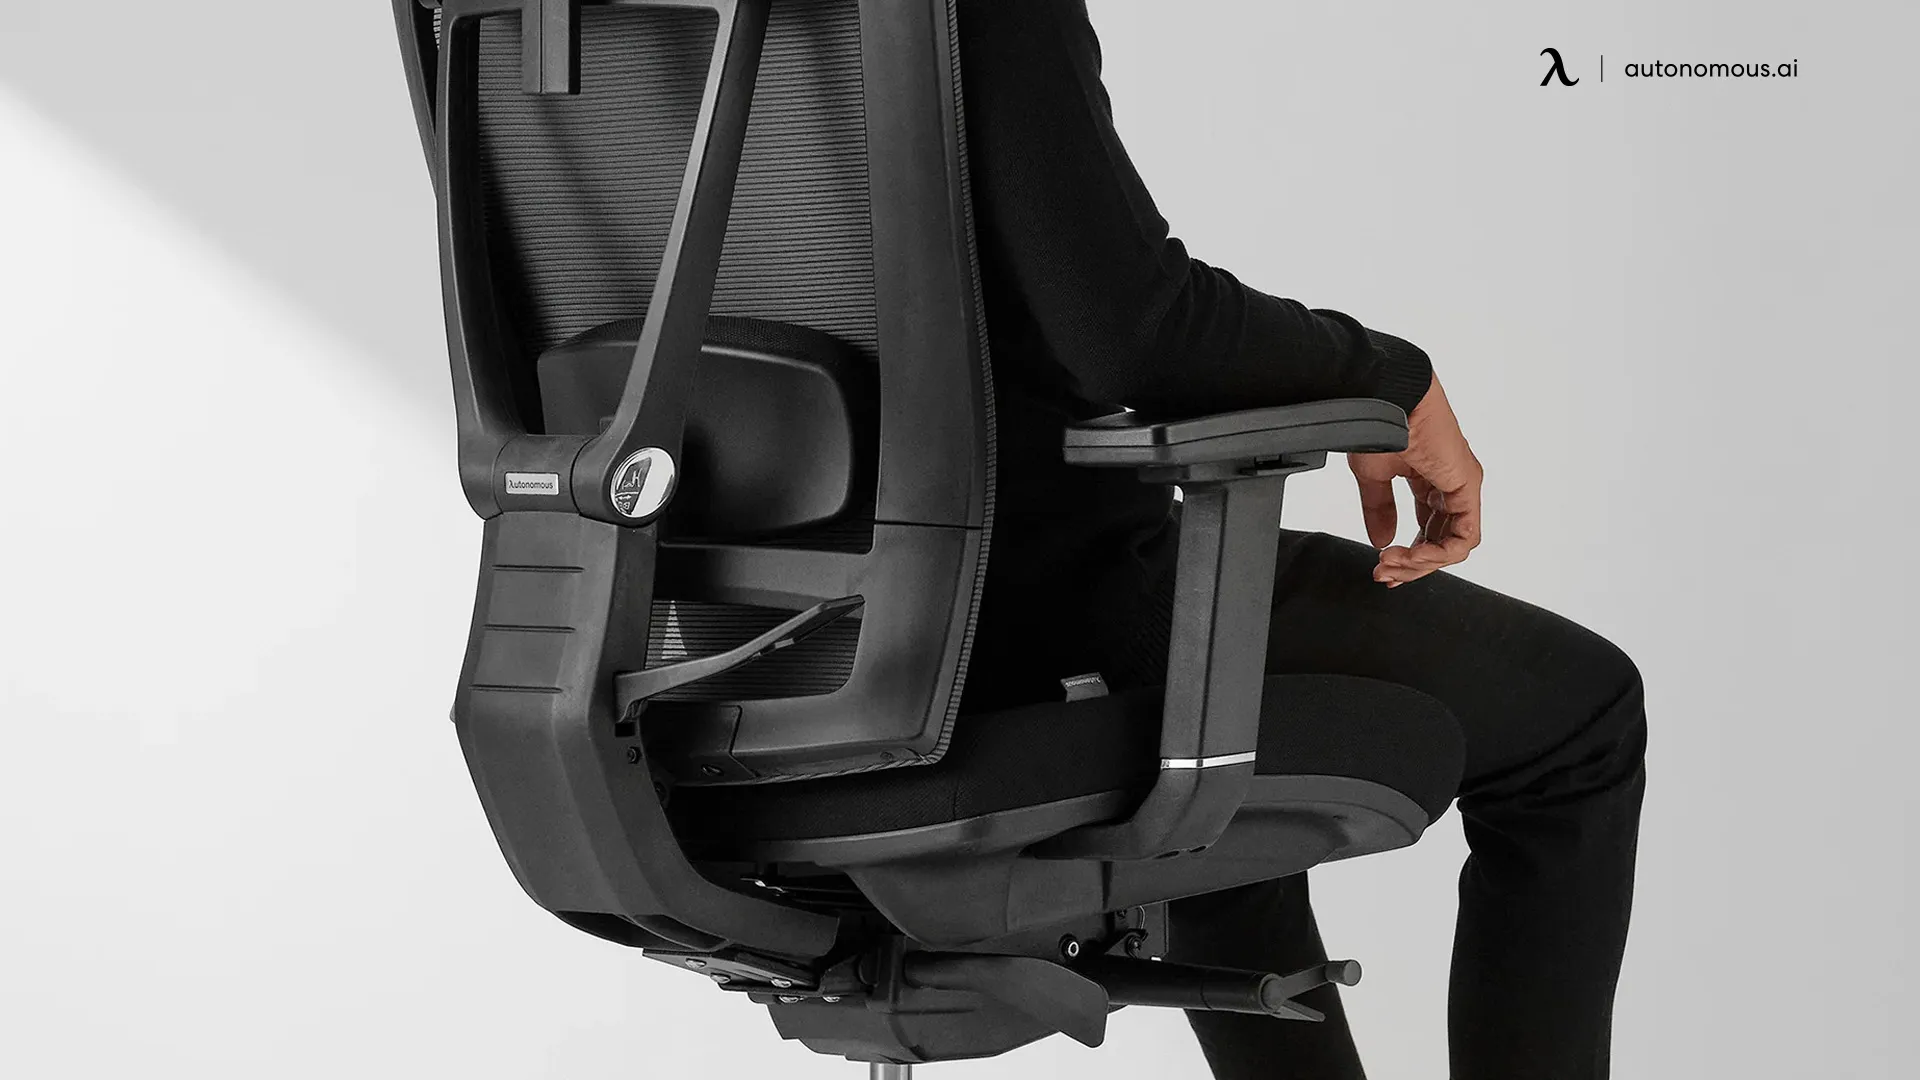 Choosing a Lumbar Support Chair for Your Office: How We Picked and Tested